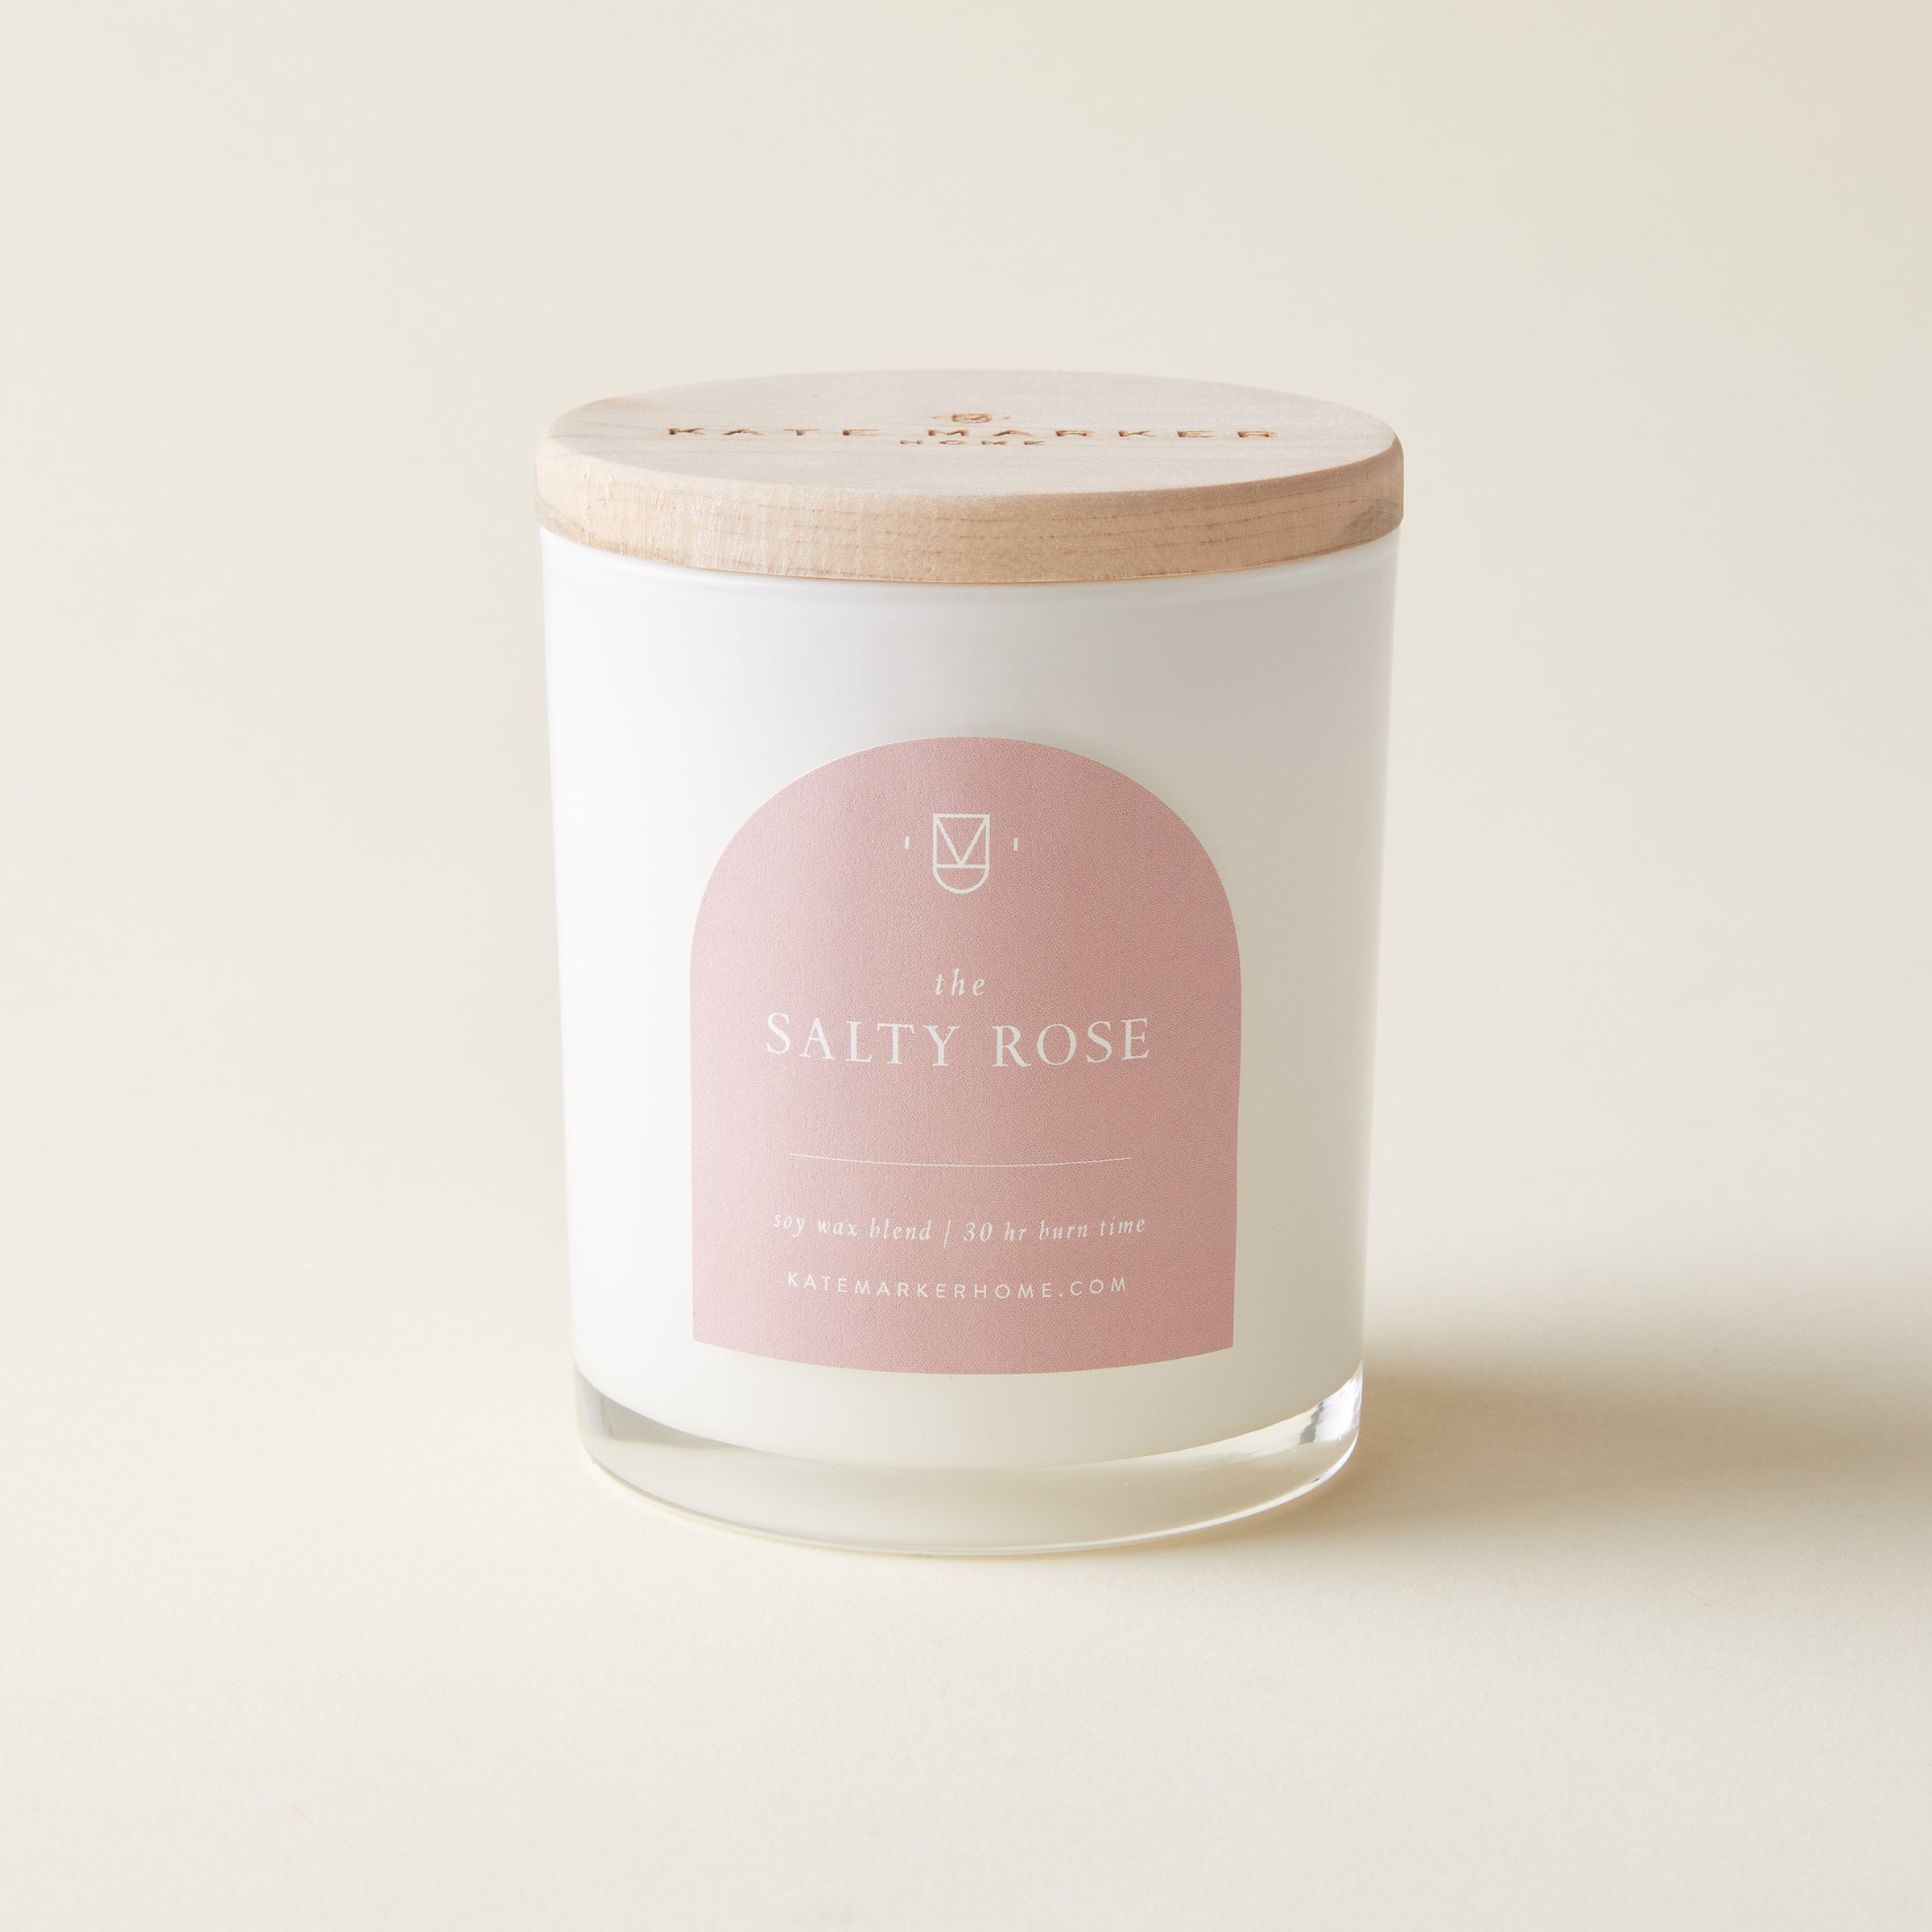 The Salty Rose Candle